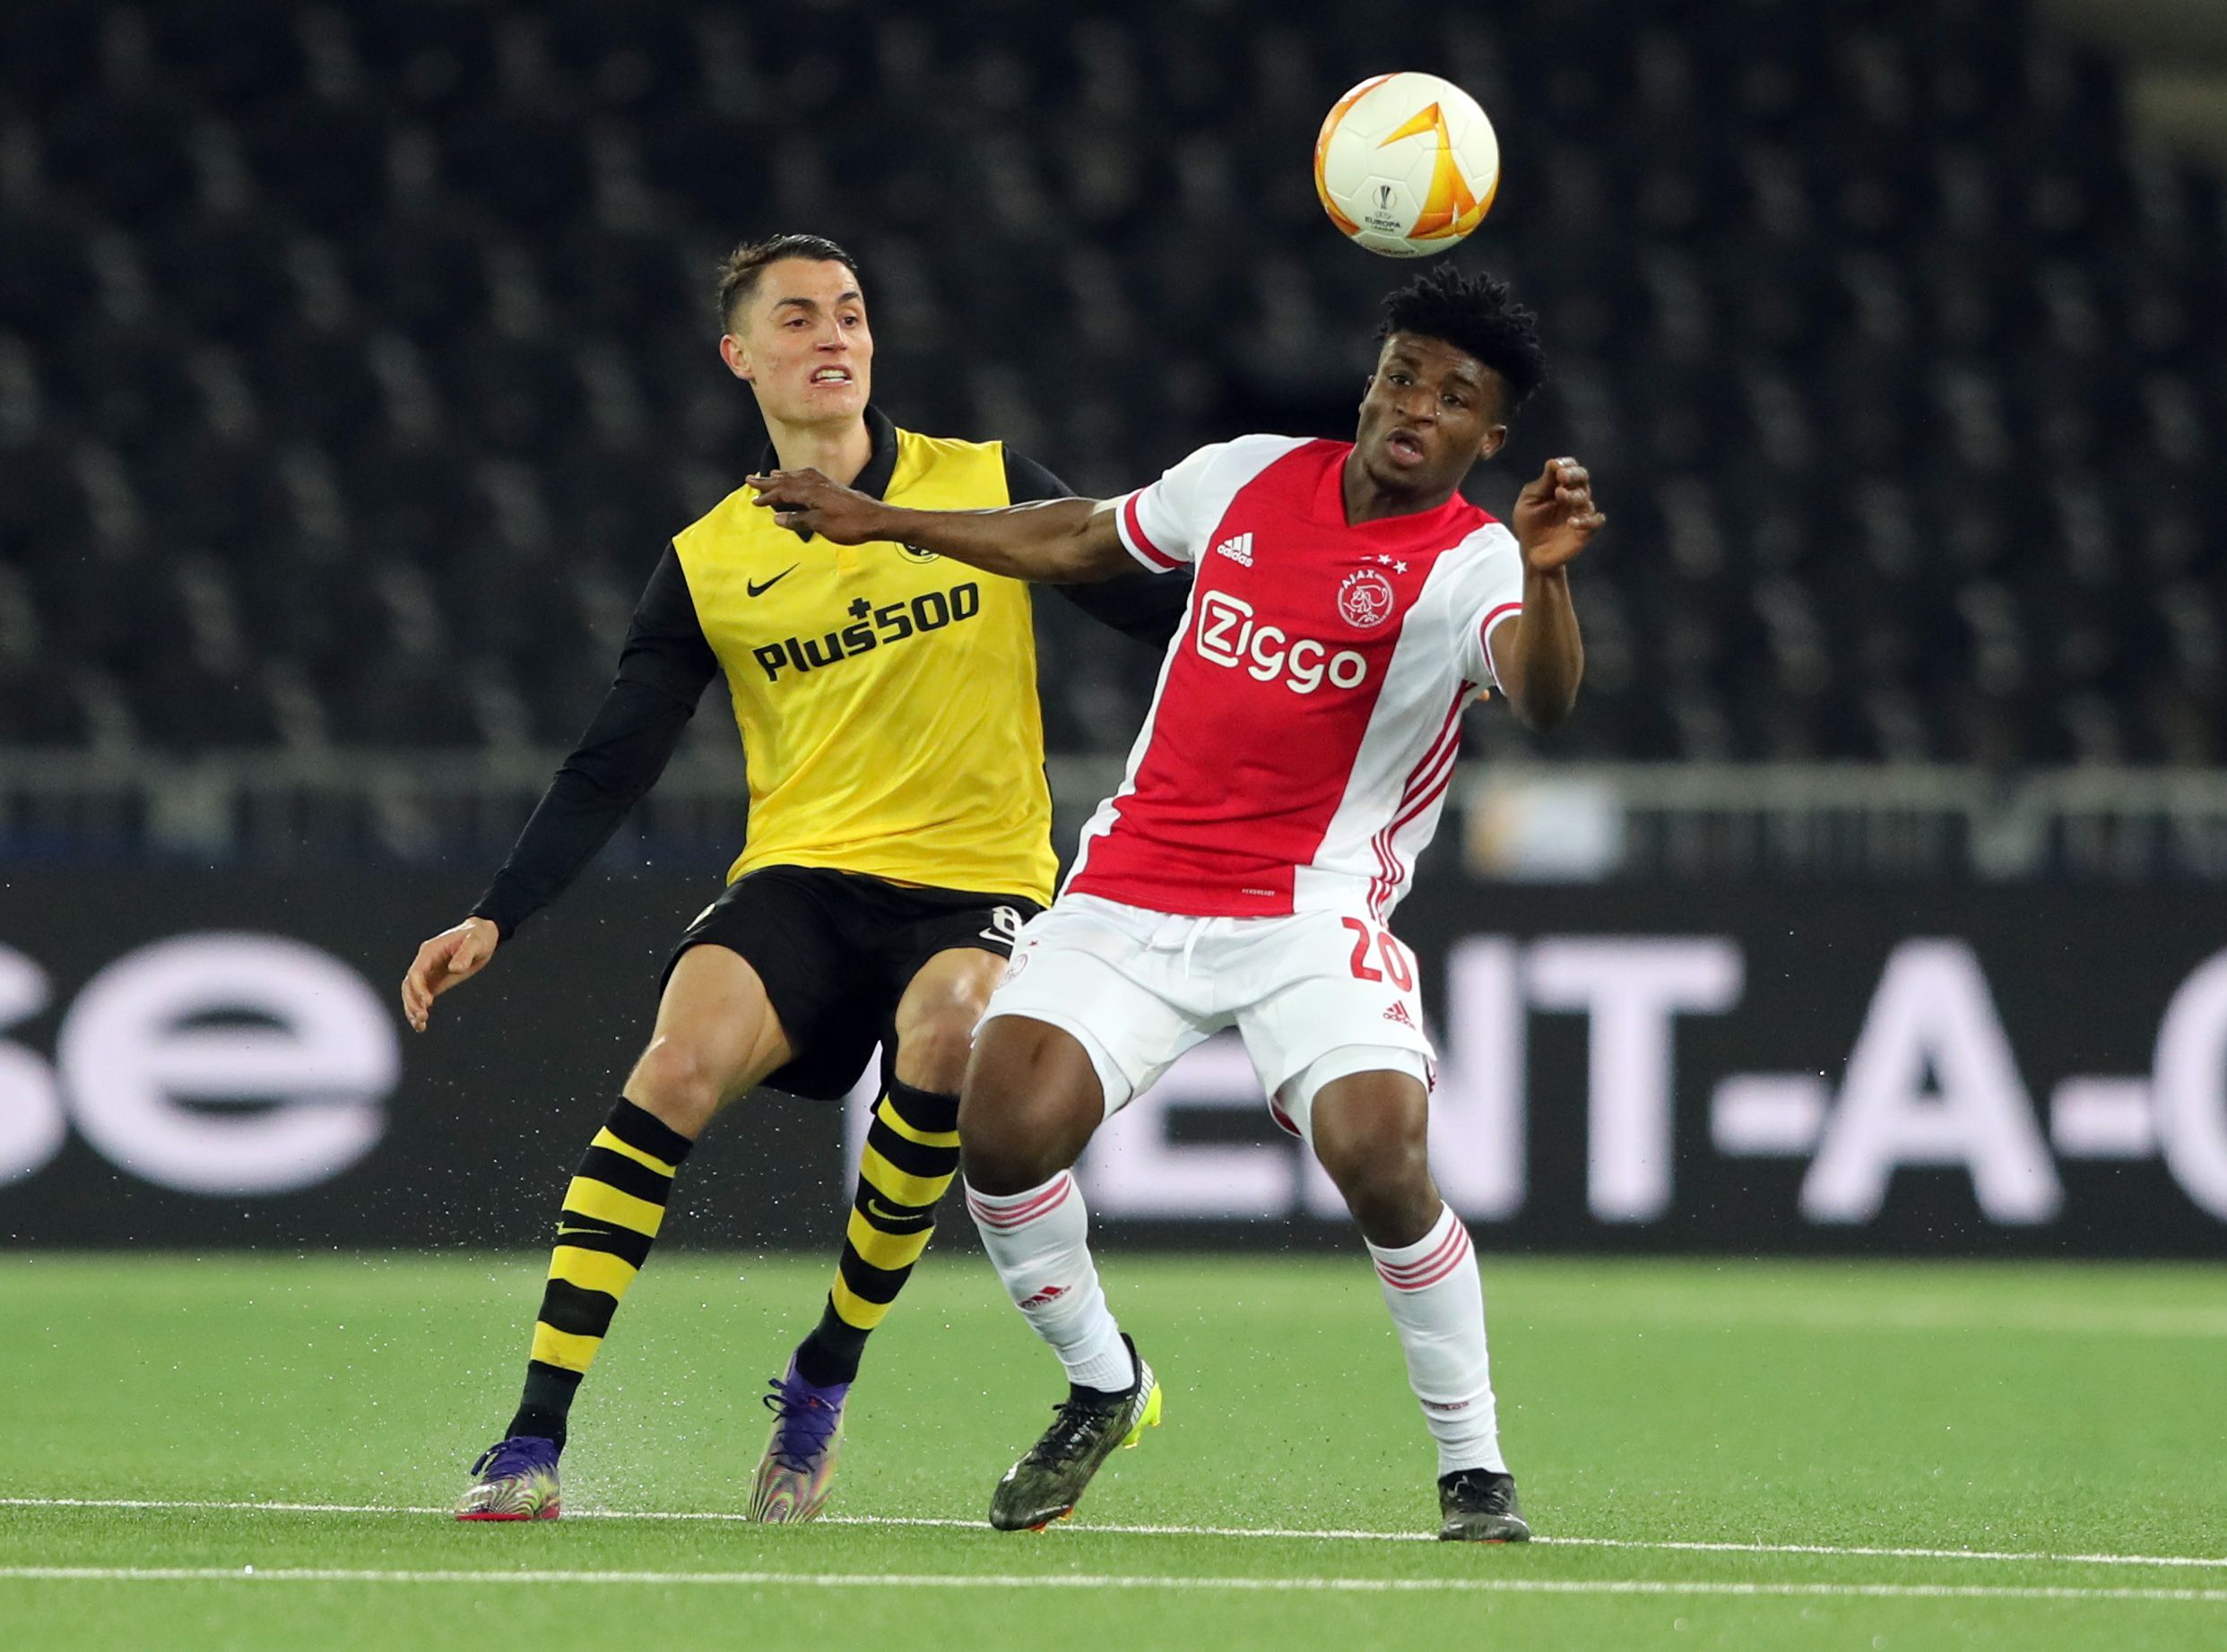 Soccer Football - Europa League - Round of 16 Second Leg - BSC Young Boys v Ajax Amsterdam - Stadion Wankdorf, Bern, Switzerland - March 18, 2021 Ajax Amsterdam's Mohammed Kudus in action with BSC Young Boys' Vincent Sierro REUTERS/Arnd Wiegmann